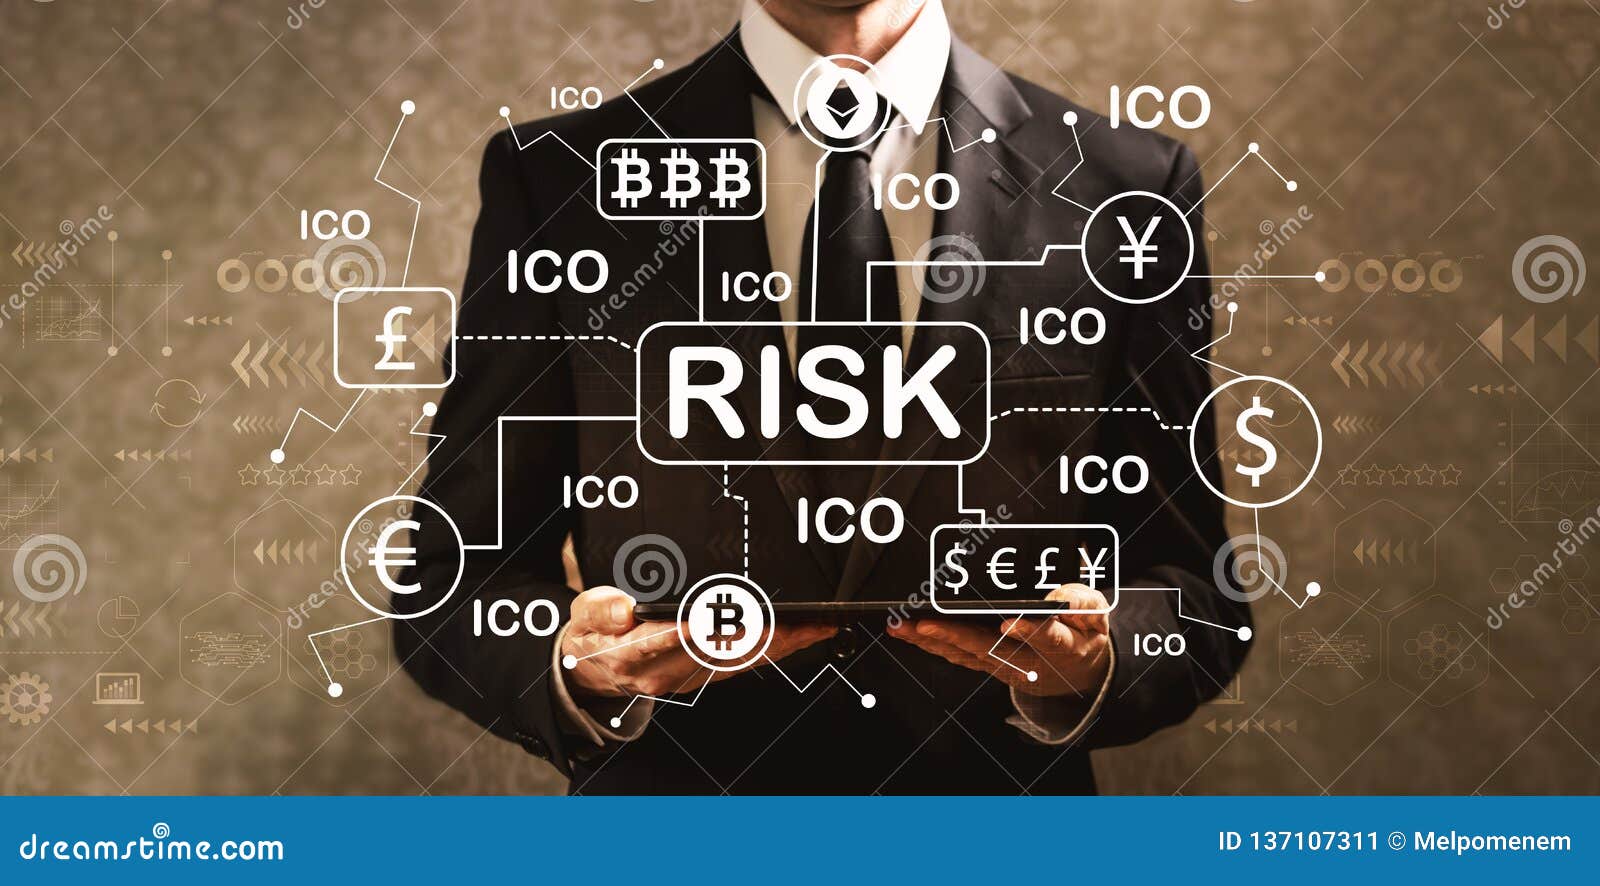 Cryptocurrency Risk Theme With Businessman Holding A ...